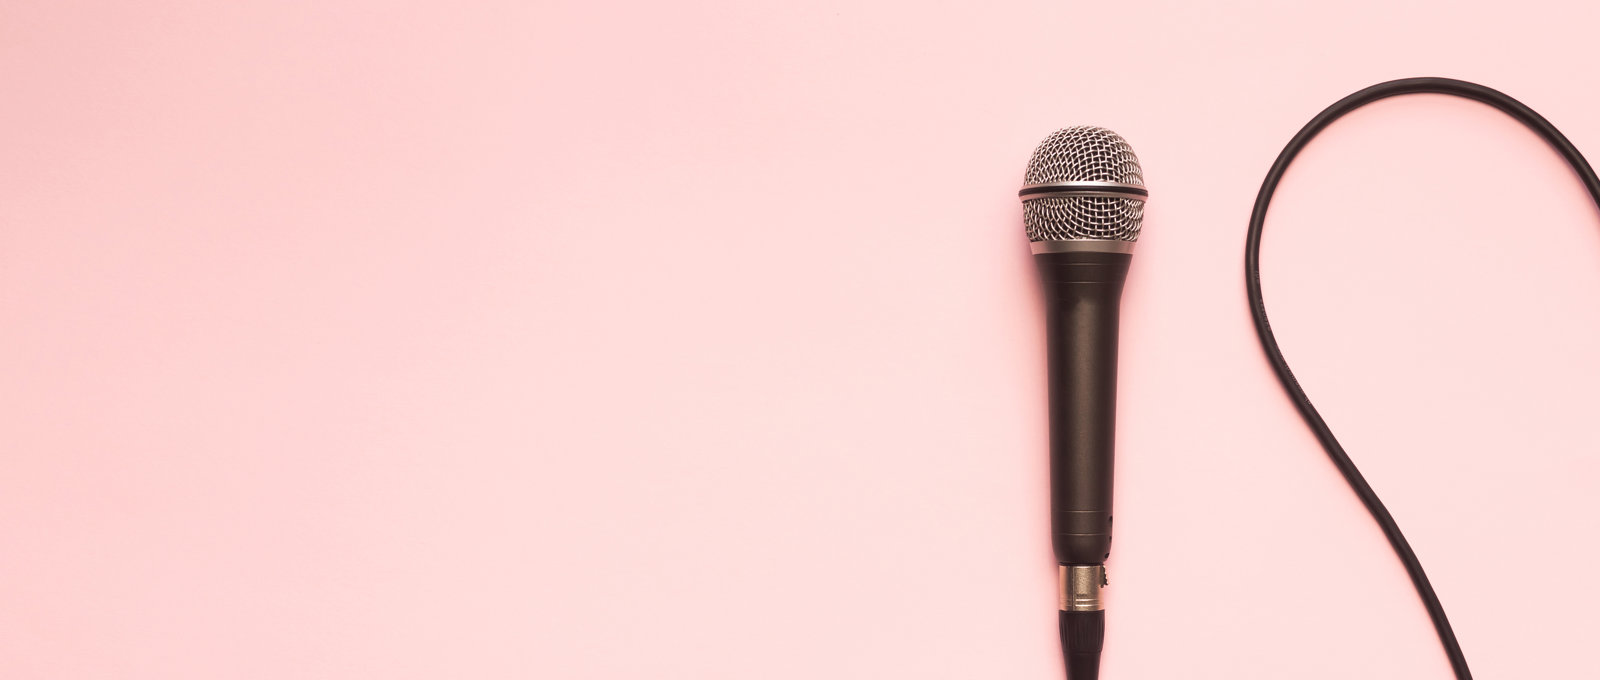 Photograph of a microphone and cable on a pink surface